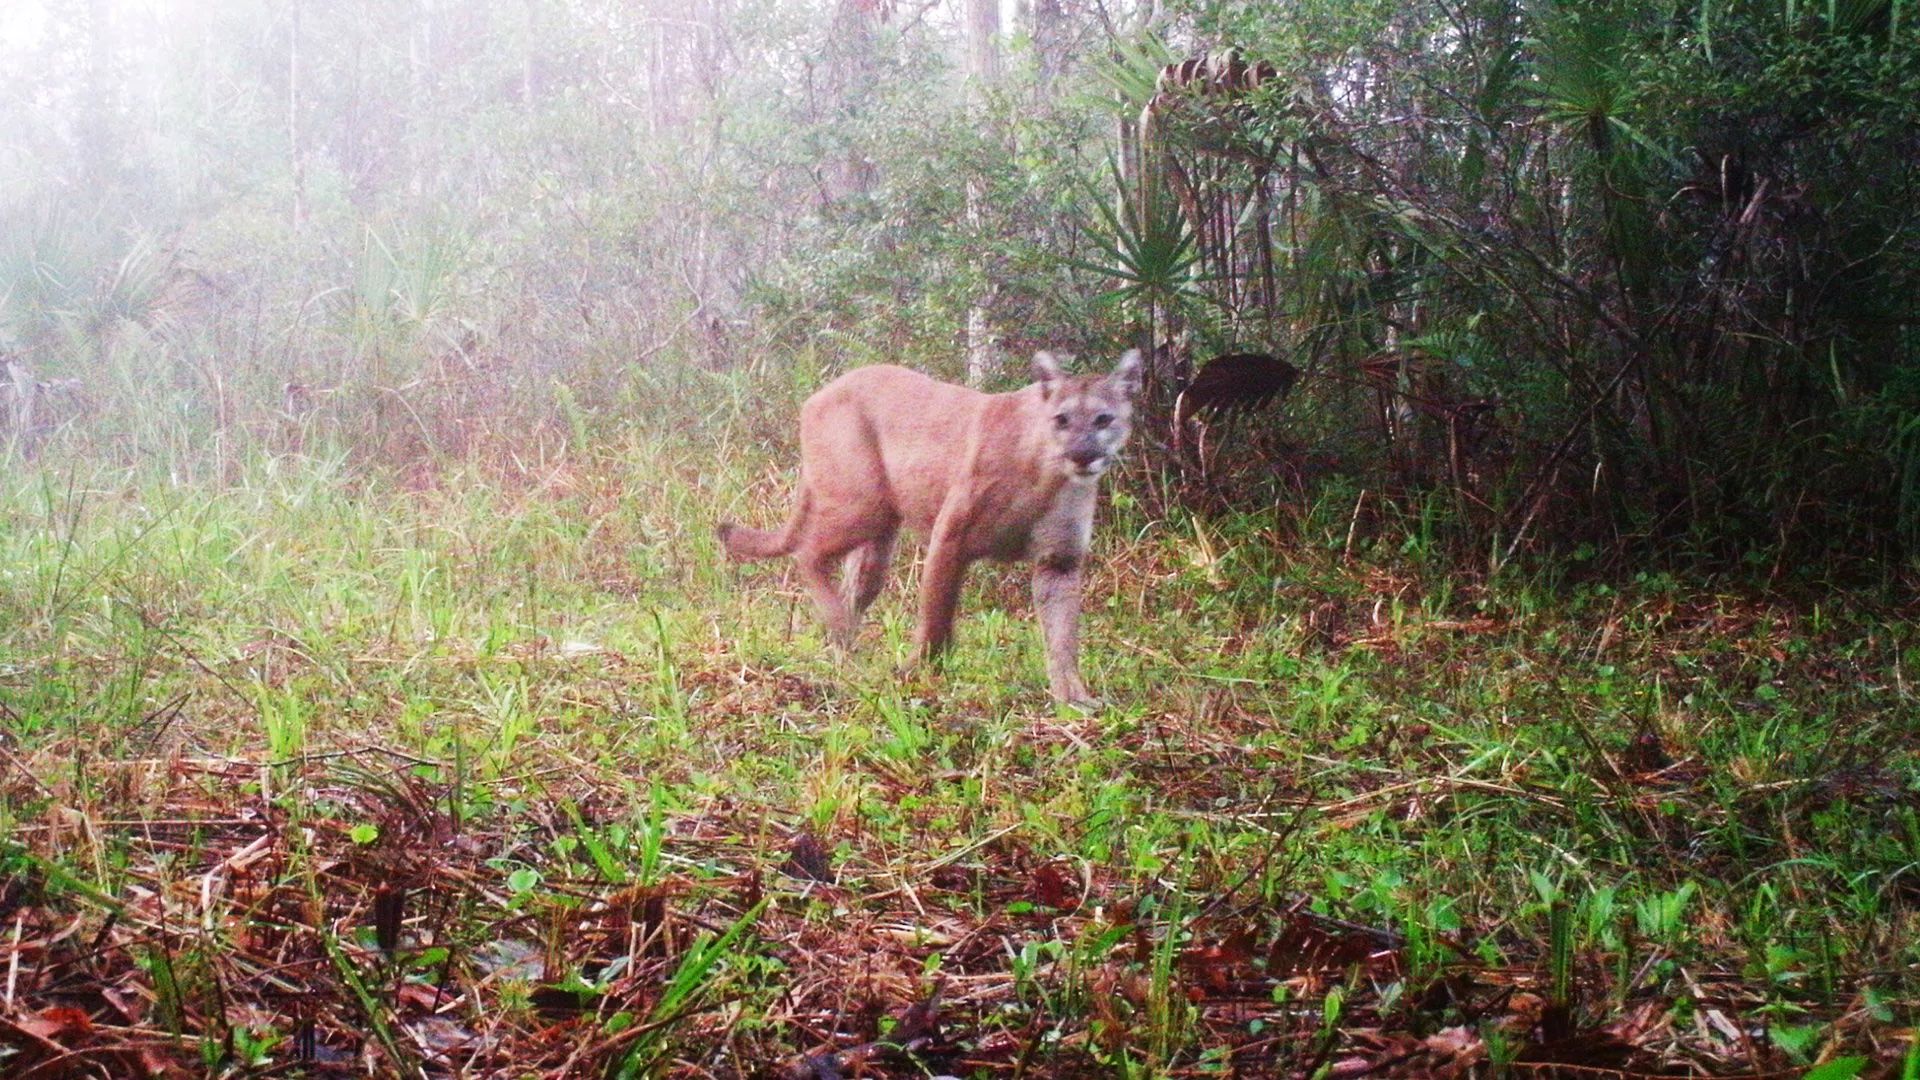 A panther in South Florida captured by wildlife cameras.